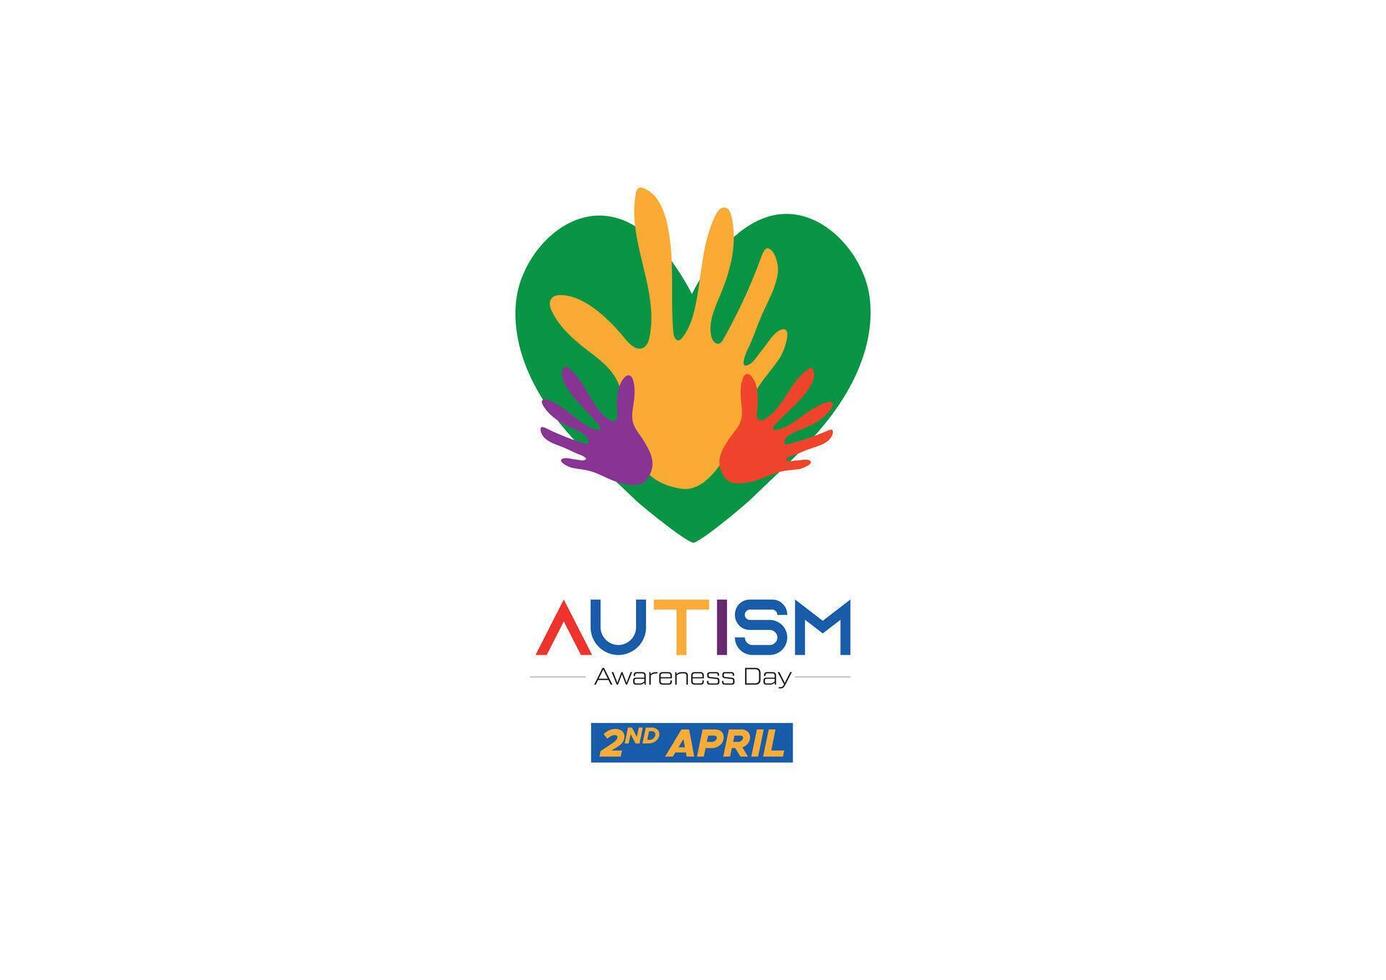 International Autism Awareness Day Multicolored Puzzle In The Form Of Heart And Hands. Vector Illustration On A White Background